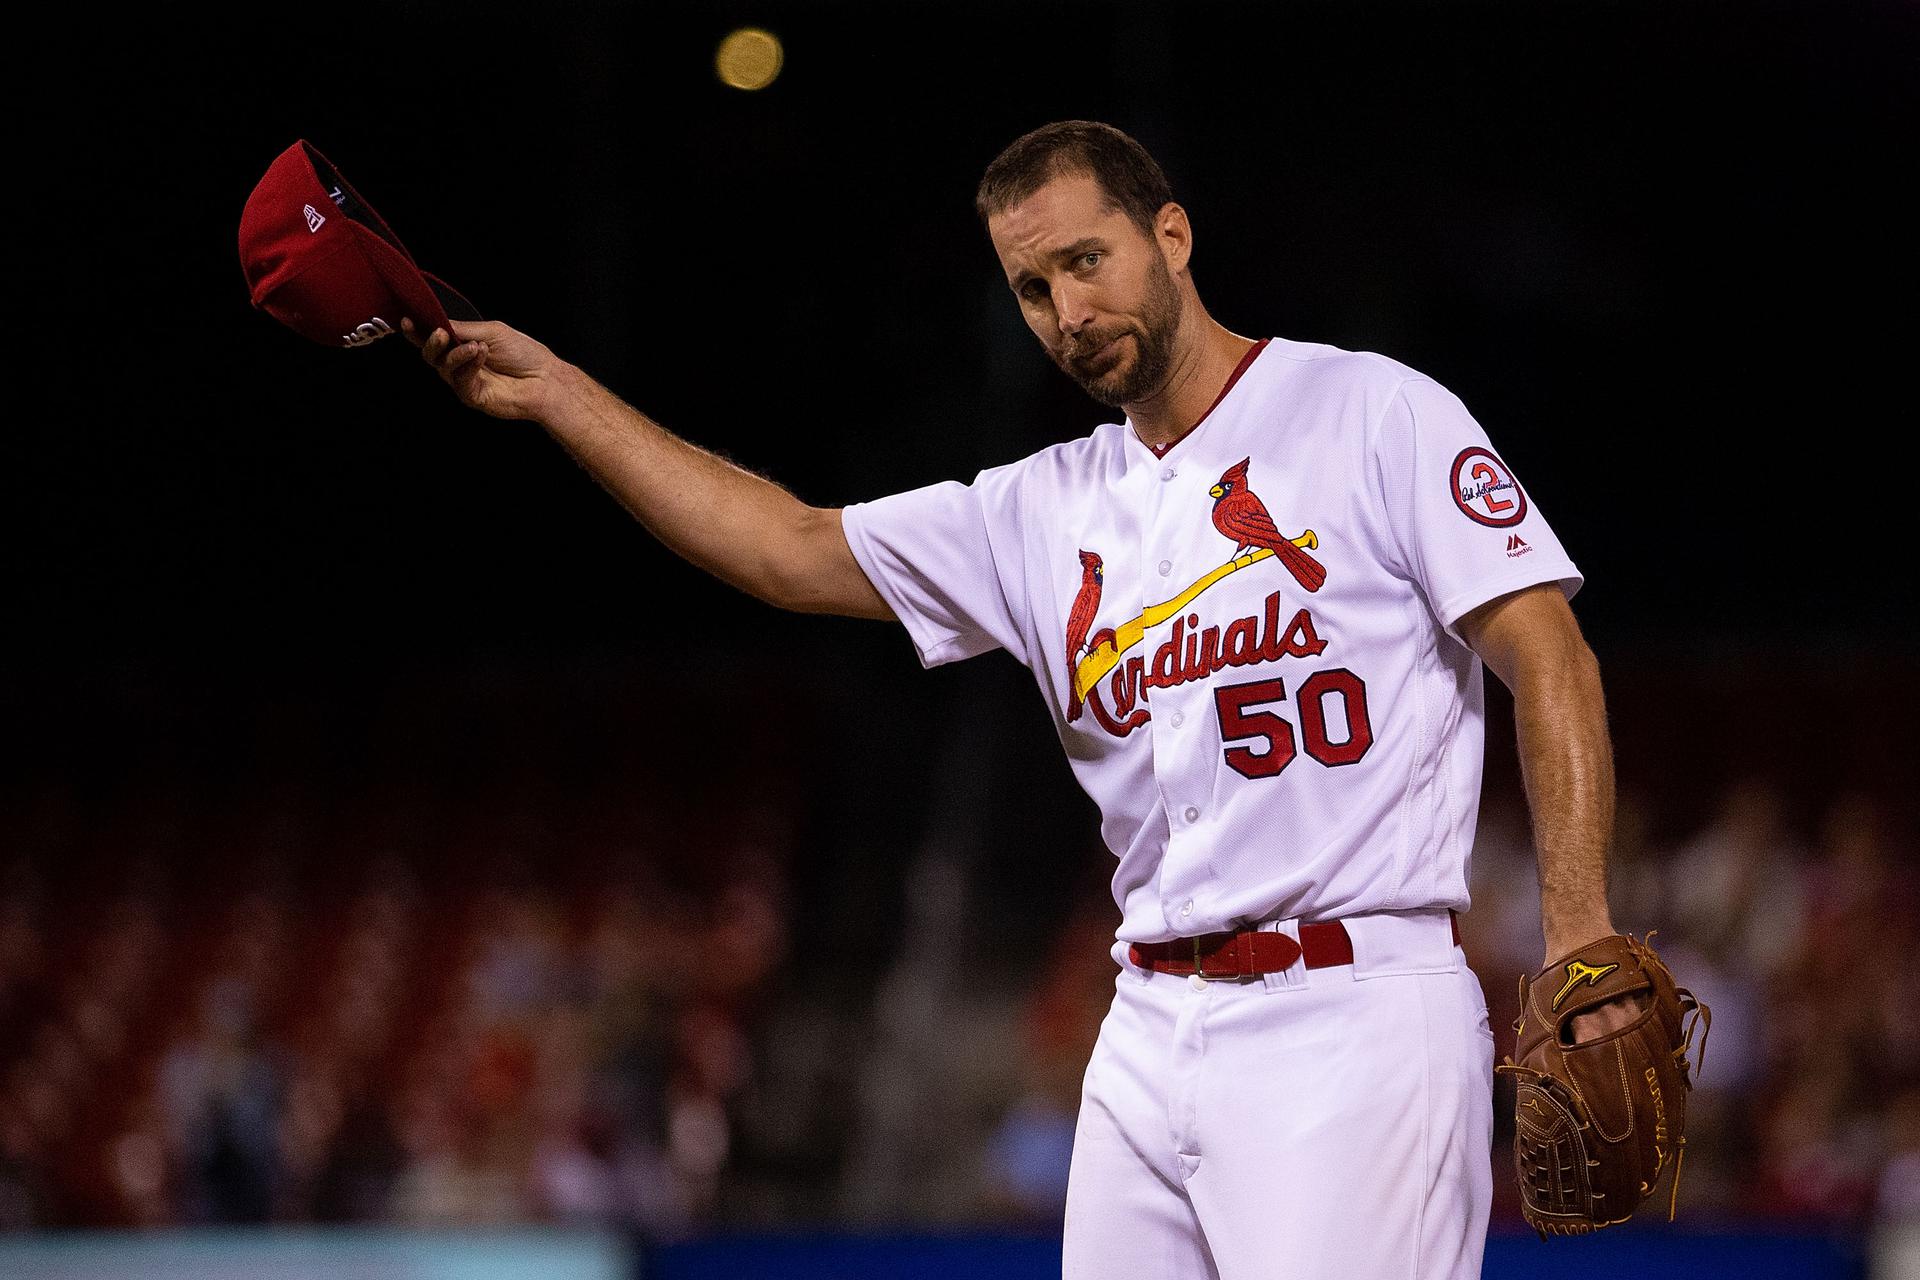 Cardinals pitcher Adam Wainwright tips his hat to the crowd while wearing a white jersey